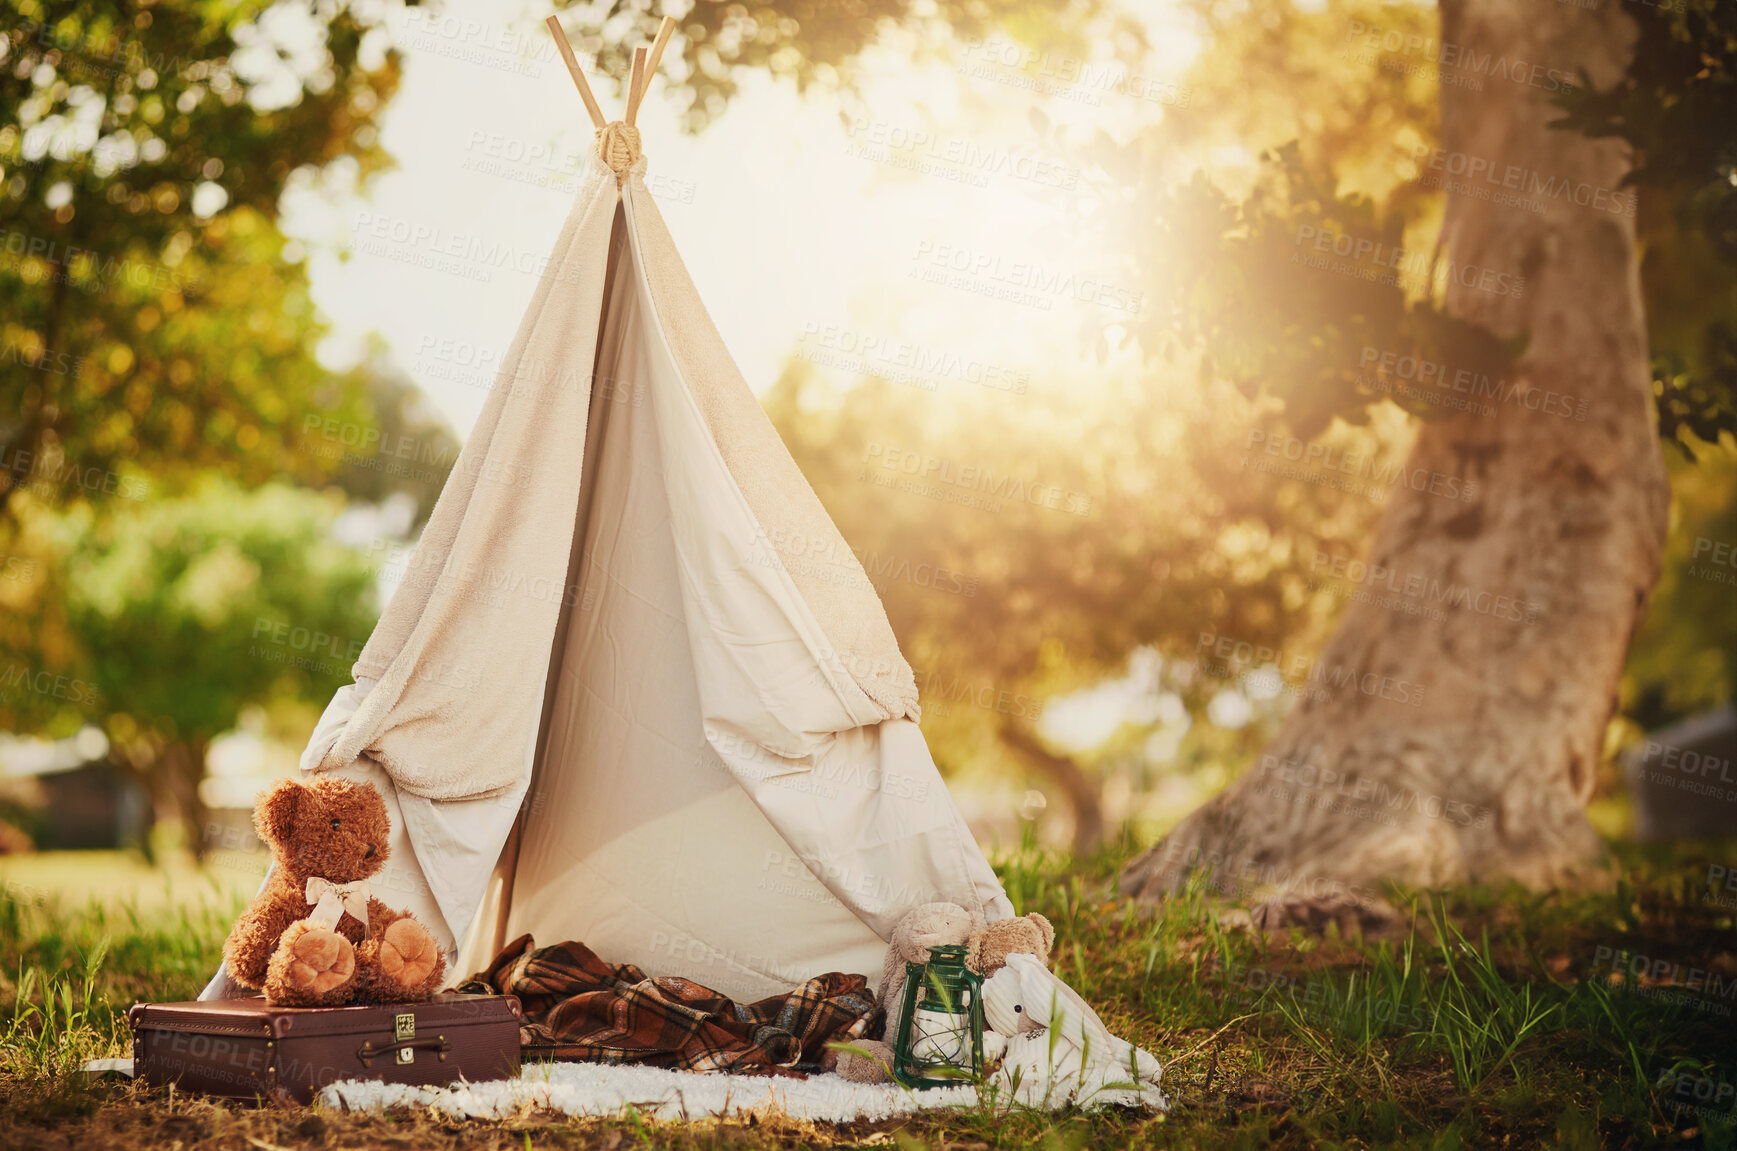 Buy stock photo Teepee, tent and fun in garden outdoor in nature for children, playing and camp for adventure or imagination. Cloth, shelter and fantasy house for kids in forest with blanket, suitcase and teddy bear